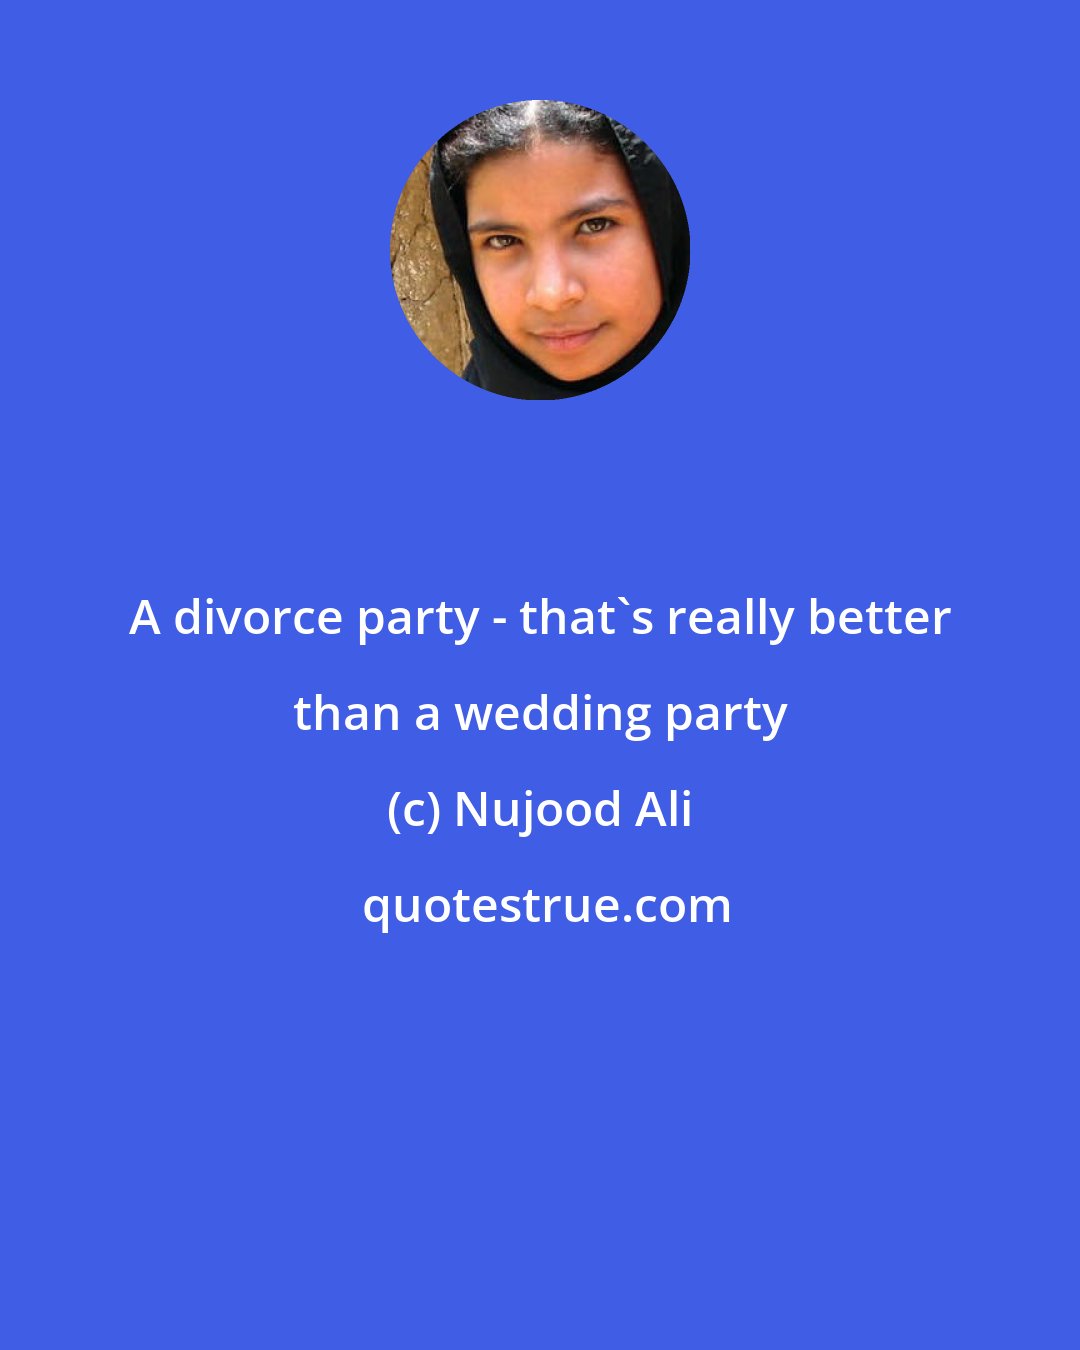 Nujood Ali: A divorce party - that's really better than a wedding party